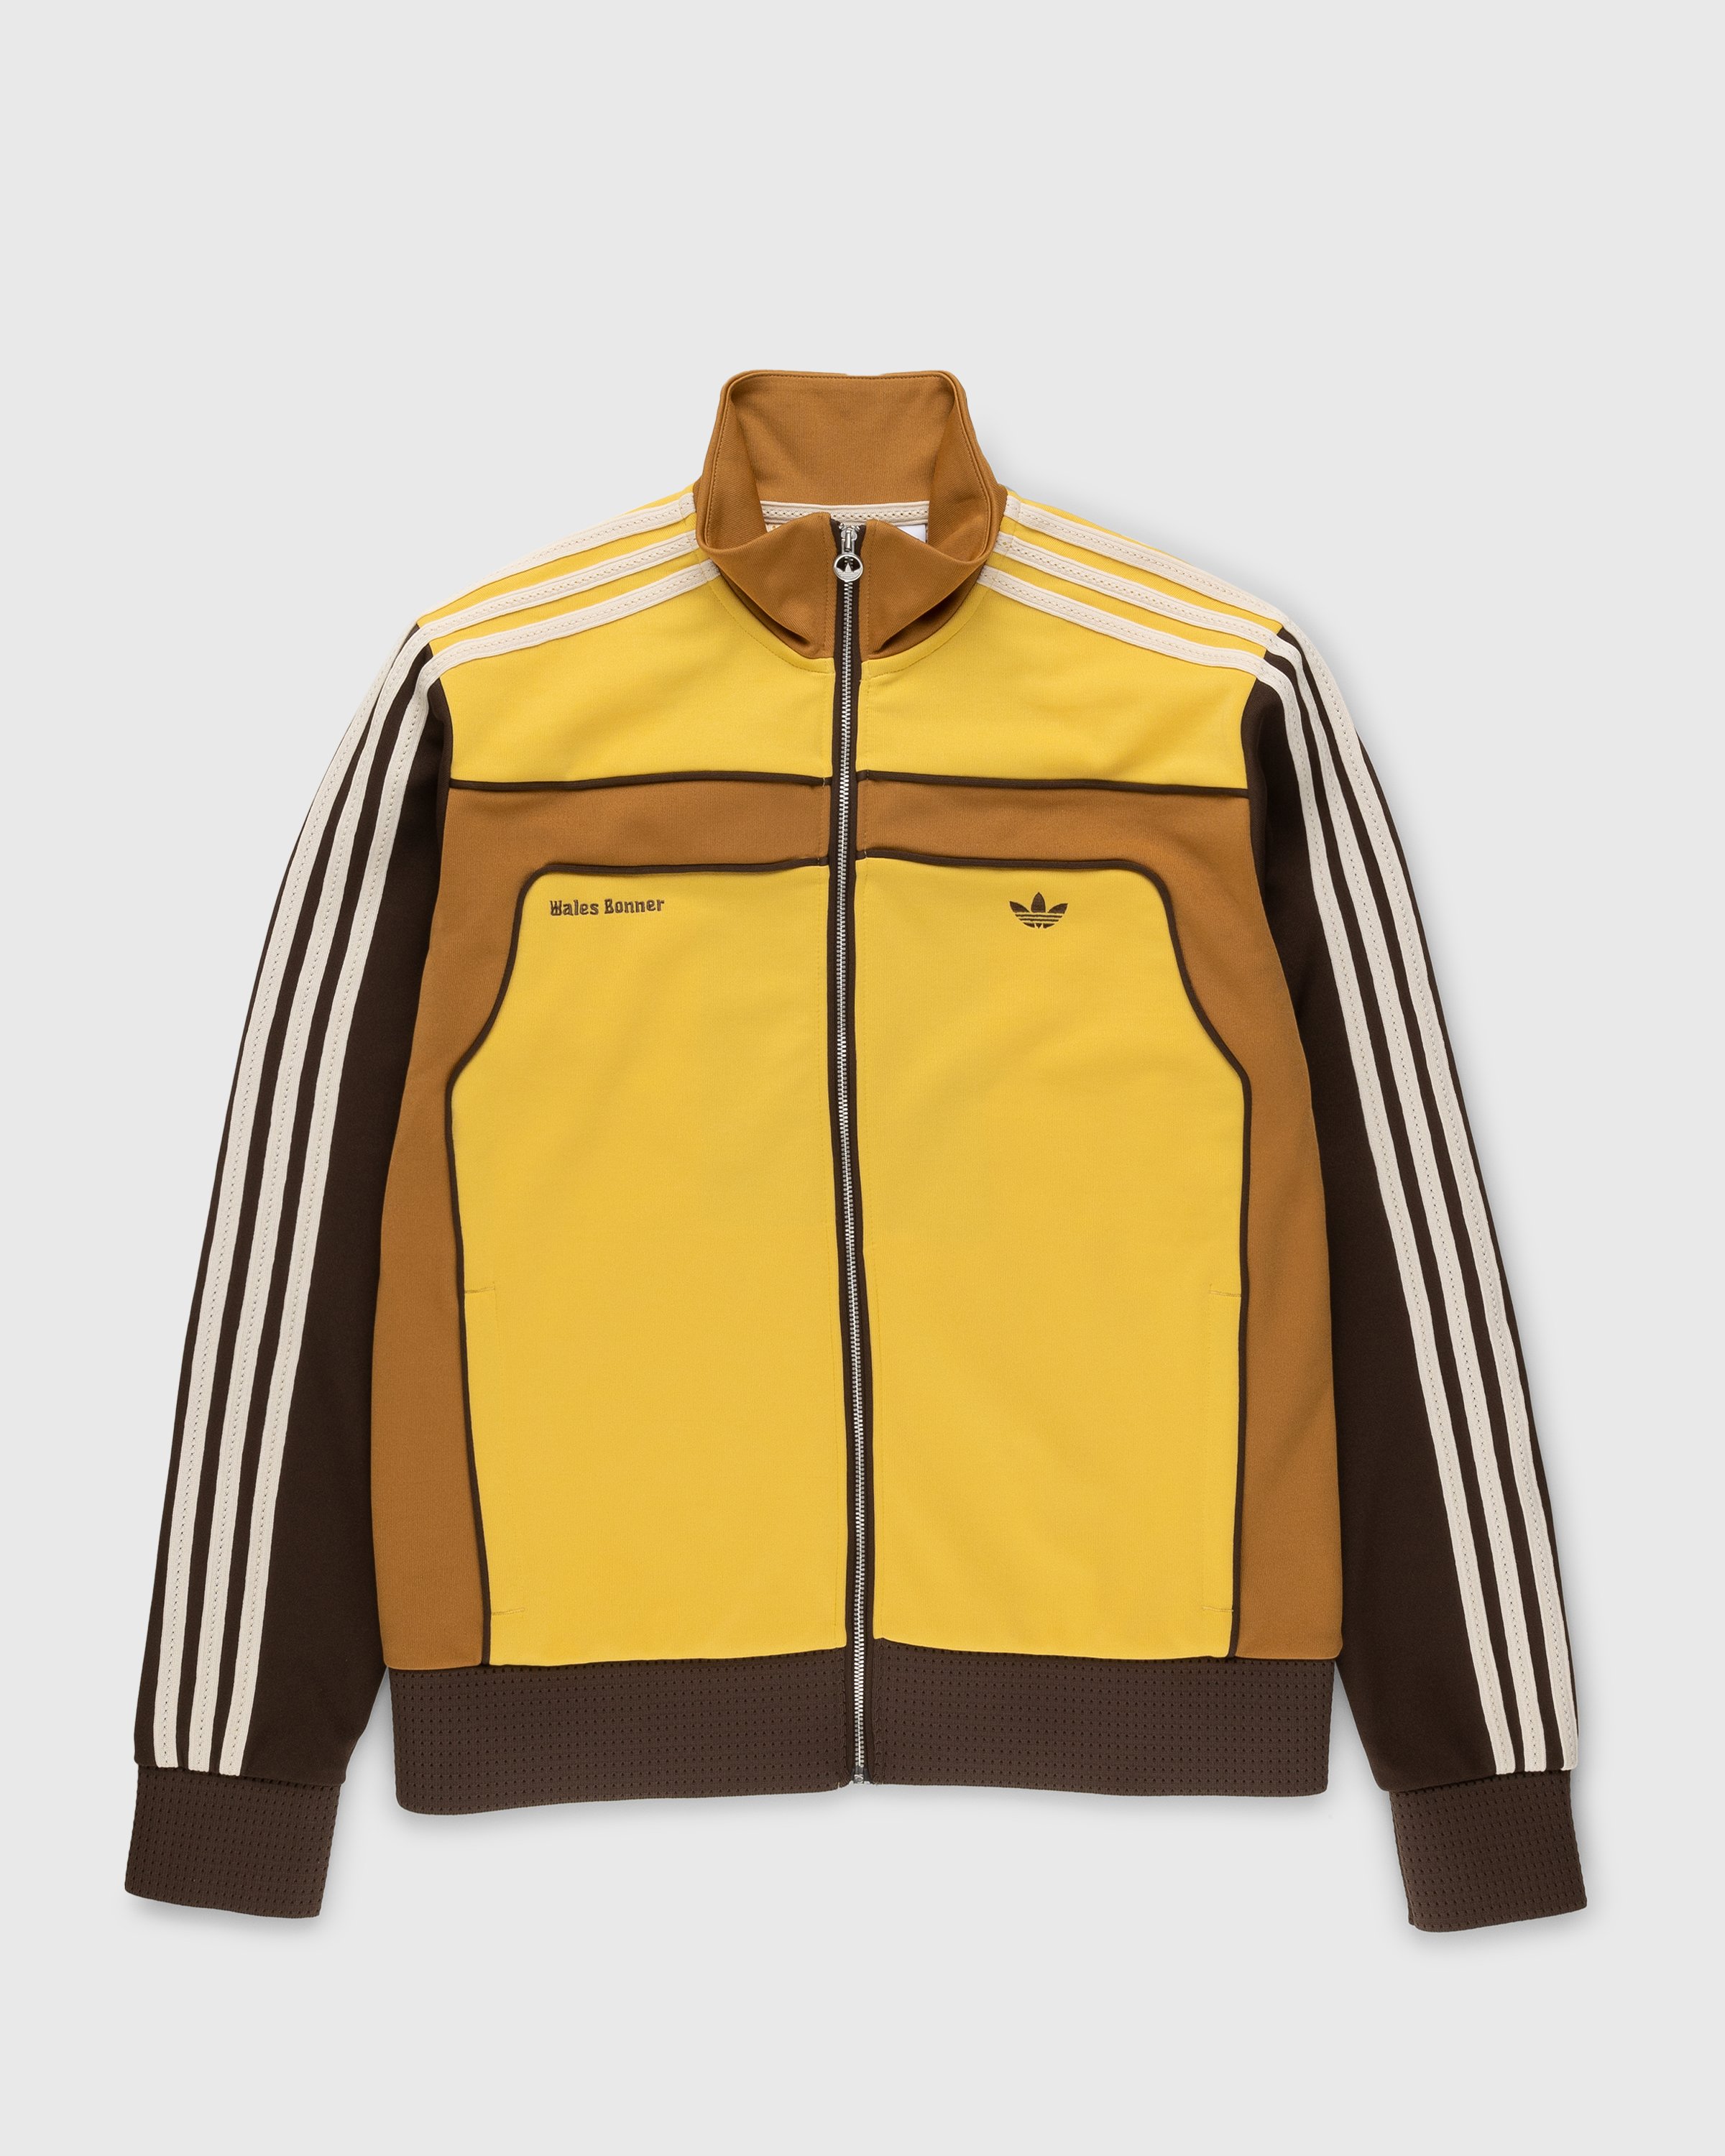 Adidas x Wales Bonner - WB Track Top St Fade Gold - Clothing - Yellow - Image 1